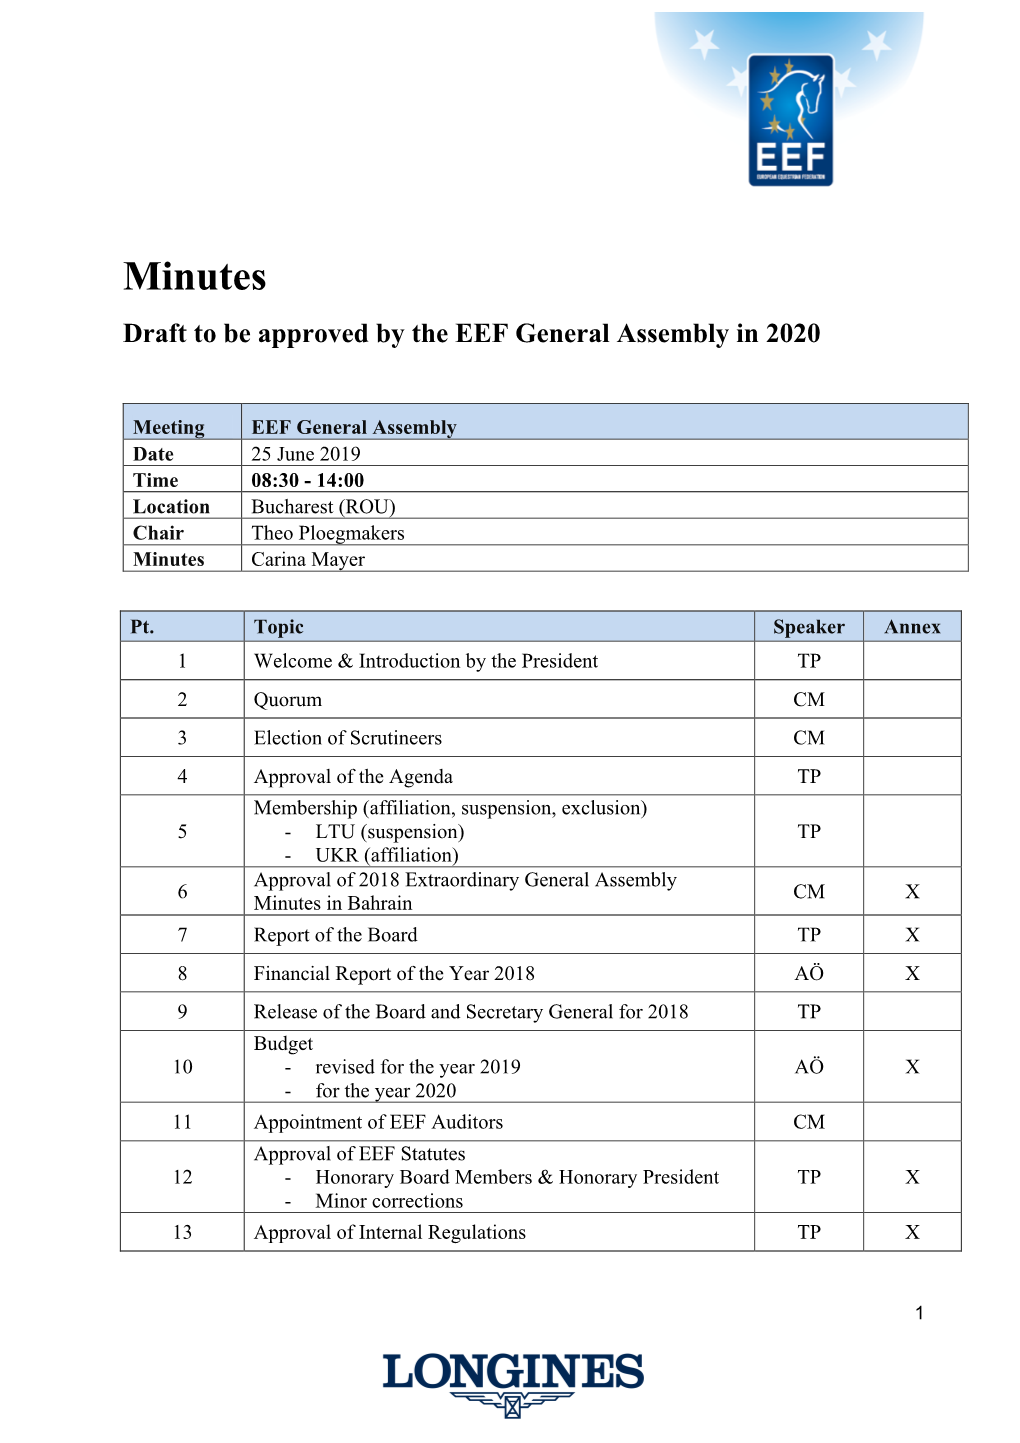 Minutes Draft to Be Approved by the EEF General Assembly in 2020